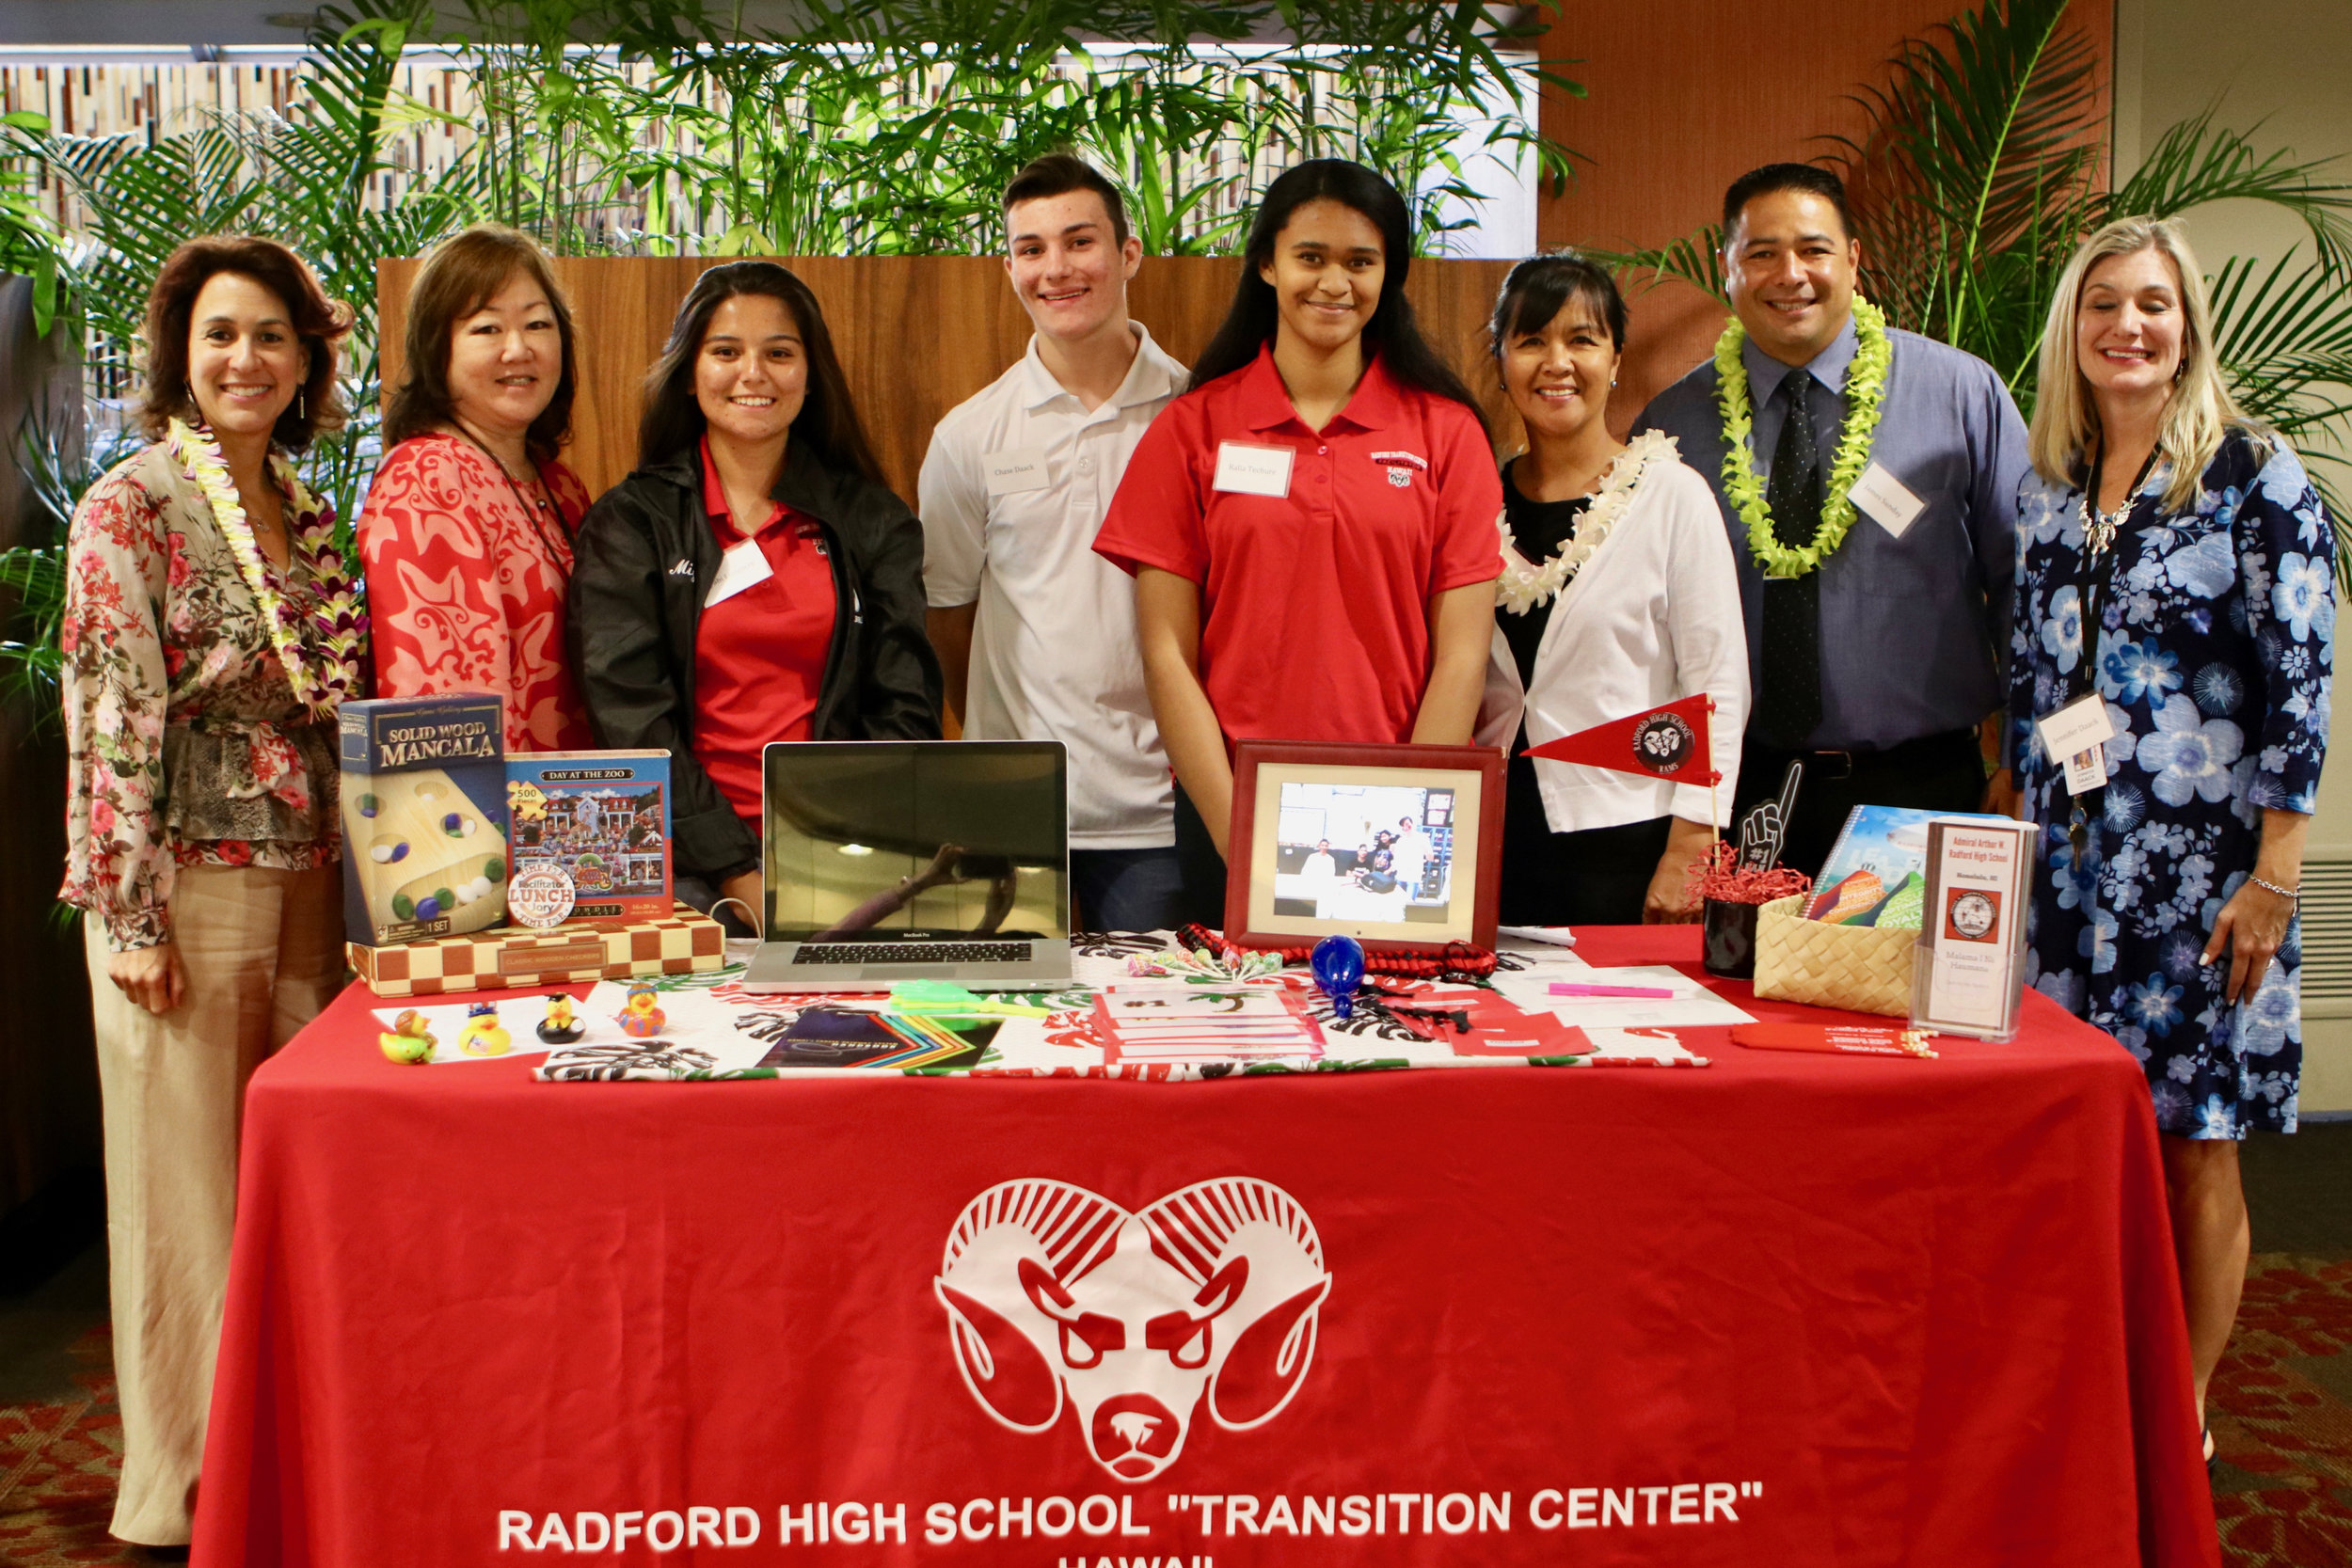 Radford High School returned to the conference this year with lots of resources at their resource table. (Copy)